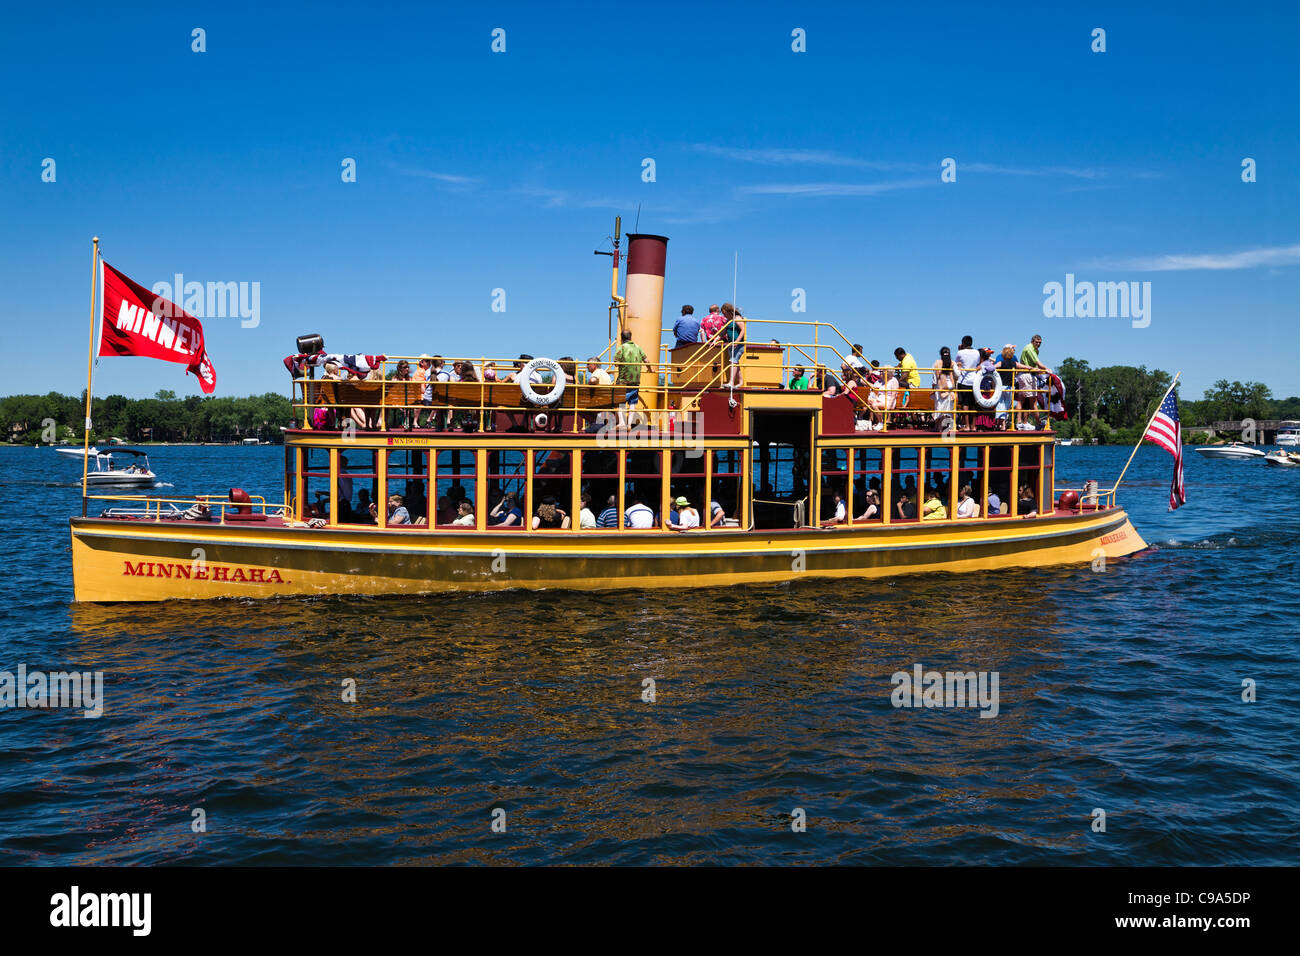 Minnehaha Steamboat does excursion tours of Lake Minnetonka from Excelsior, Minnesota. Stock Photo